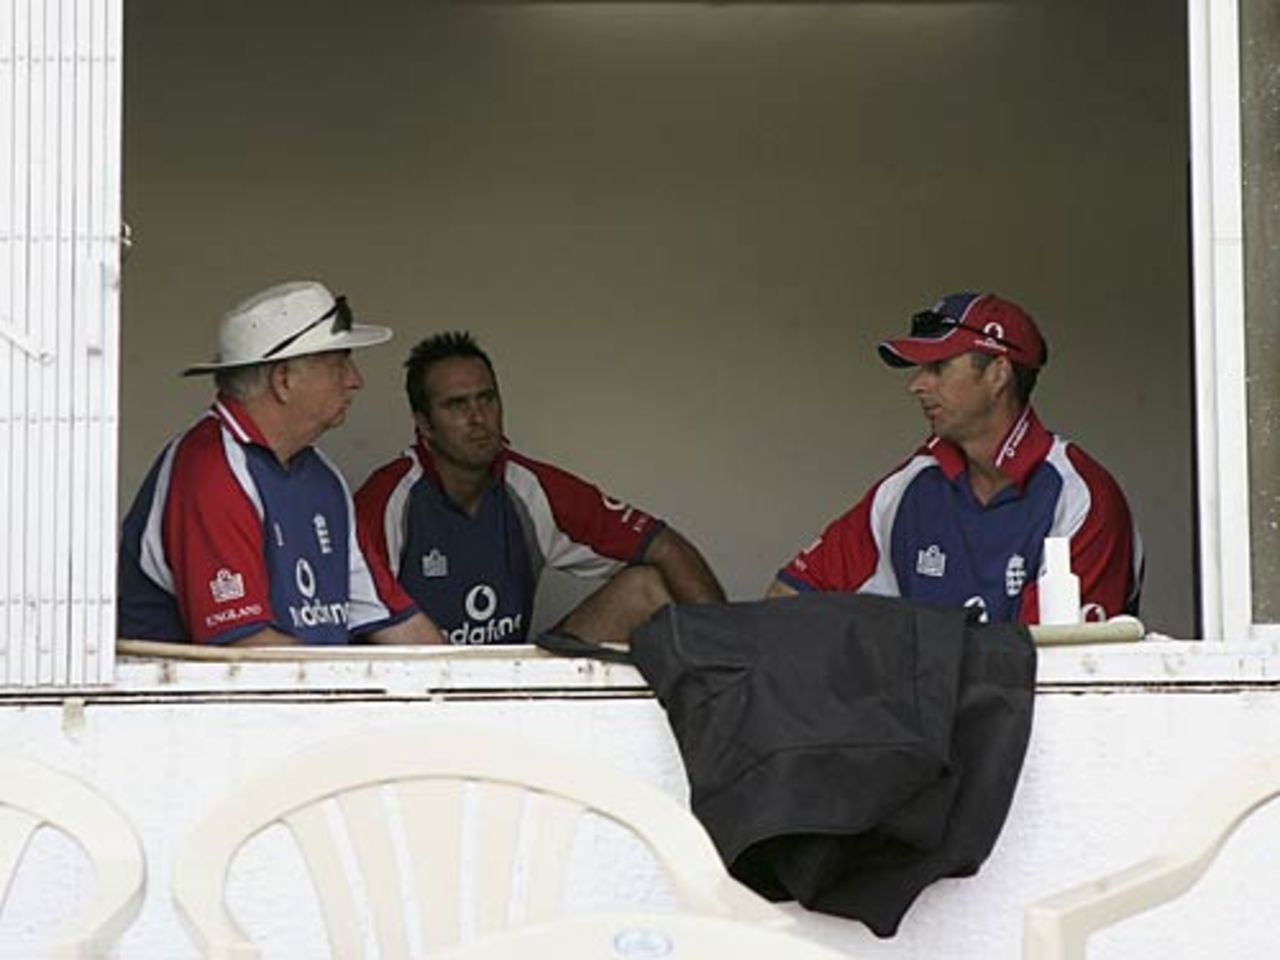 Talking heads: Duncan Fletcher, Michael Vaughan and Troy Cooley discuss strategy , Indian Board President's XI v England XI, Tour game, Vadodara, February 24, 2006